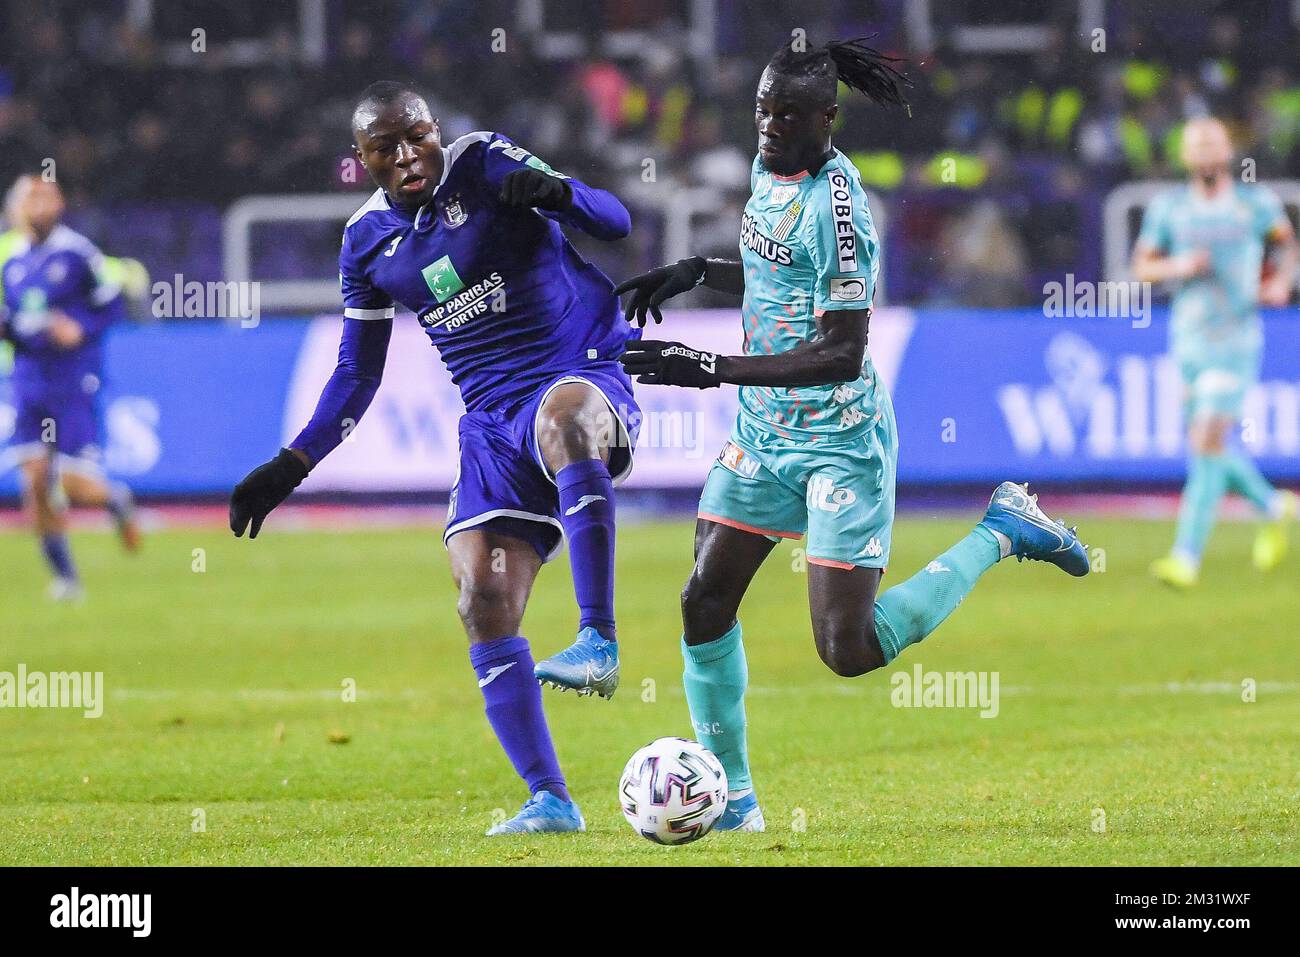 BRUSSELS, BELGIUM - December 08: Jeremy Doku of Anderlecht and Maxime Busi  of Charleroi fight for the ball during the Jupiler Pro League match day 18  between Rsc Anderlecht vs Sporting Charleroi